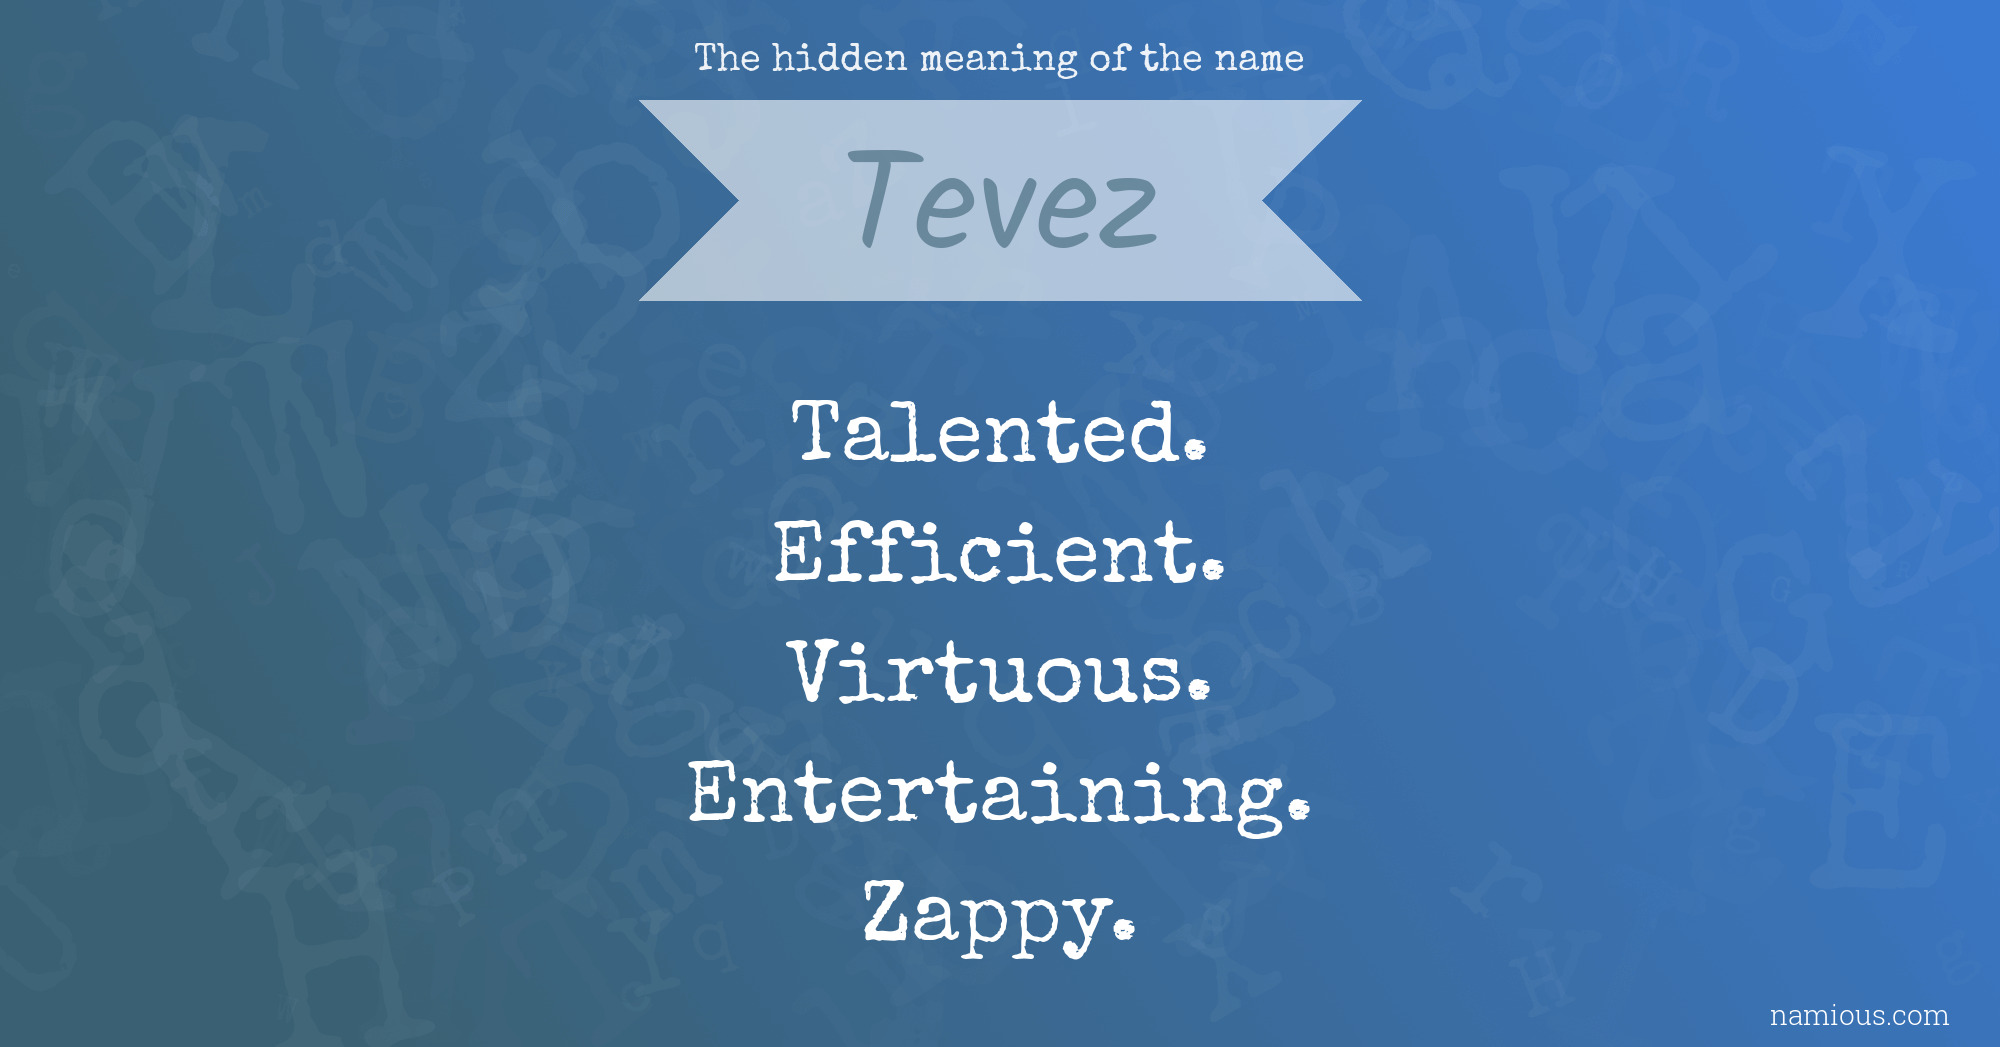 The hidden meaning of the name Tevez